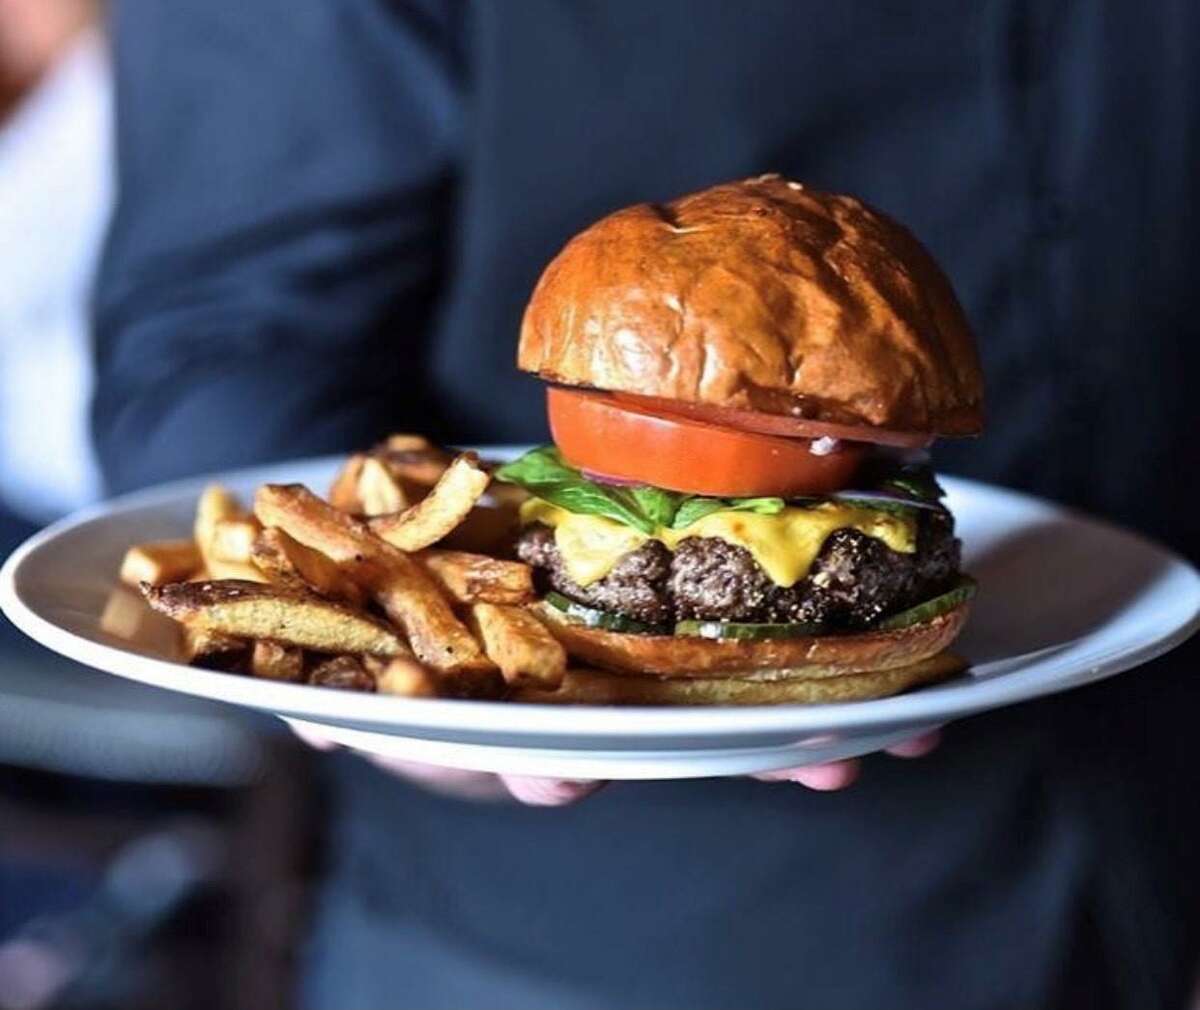 A burger is not on the menu at Killen's Steakhouse restaurants in Pearland and the Woodlands, but the kitchen will make one for guests who request.